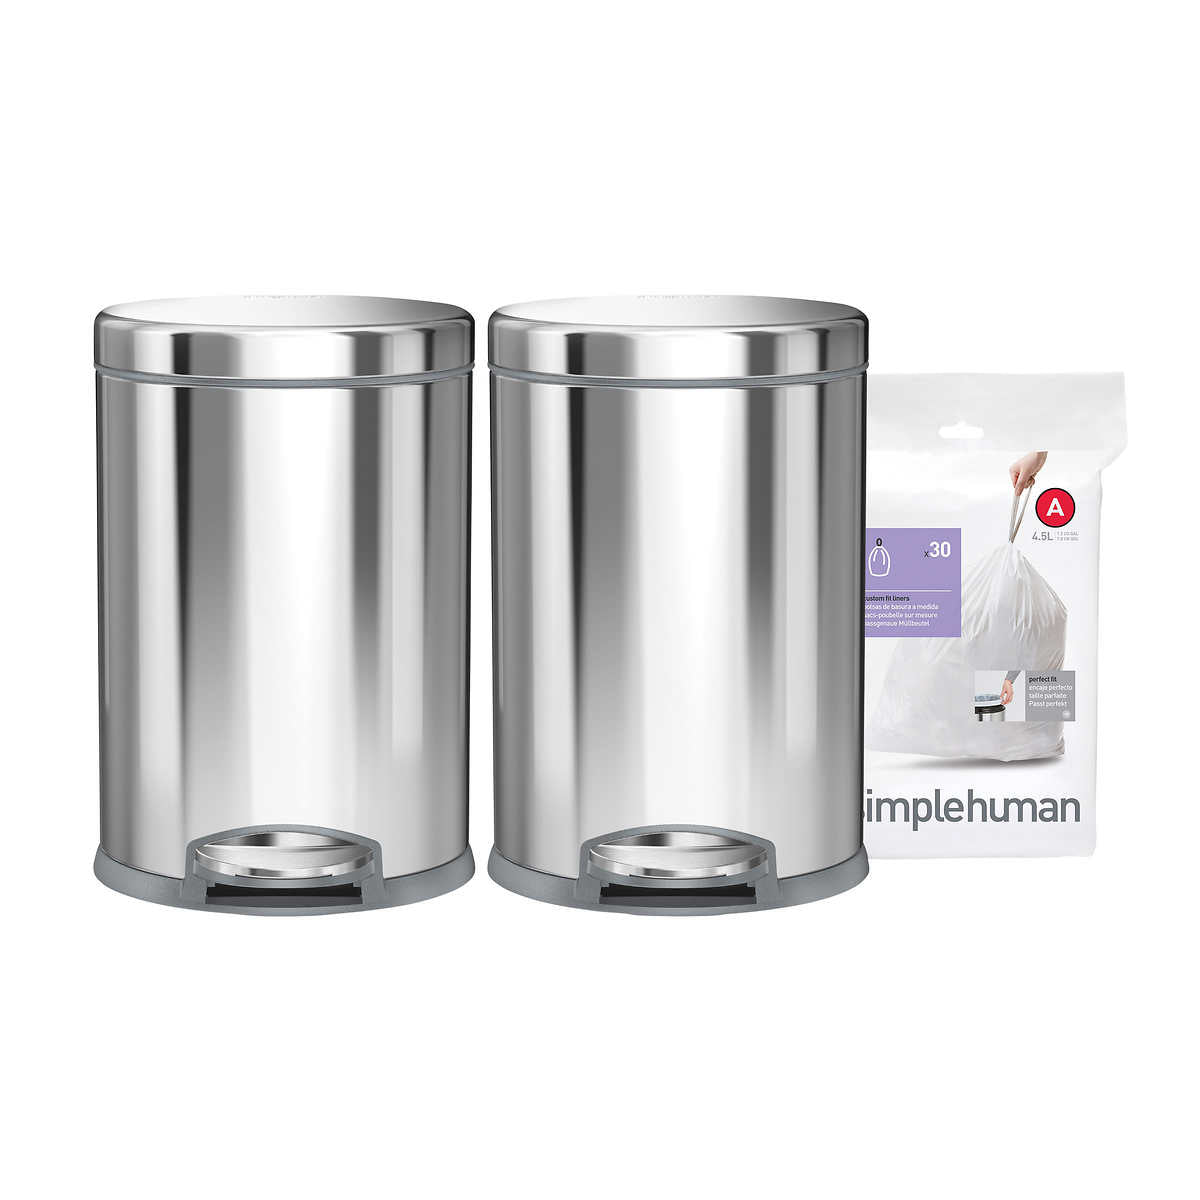 Simplehuman 4.5L Round Step Can, 2-pack and Code A Liners, 30-pack